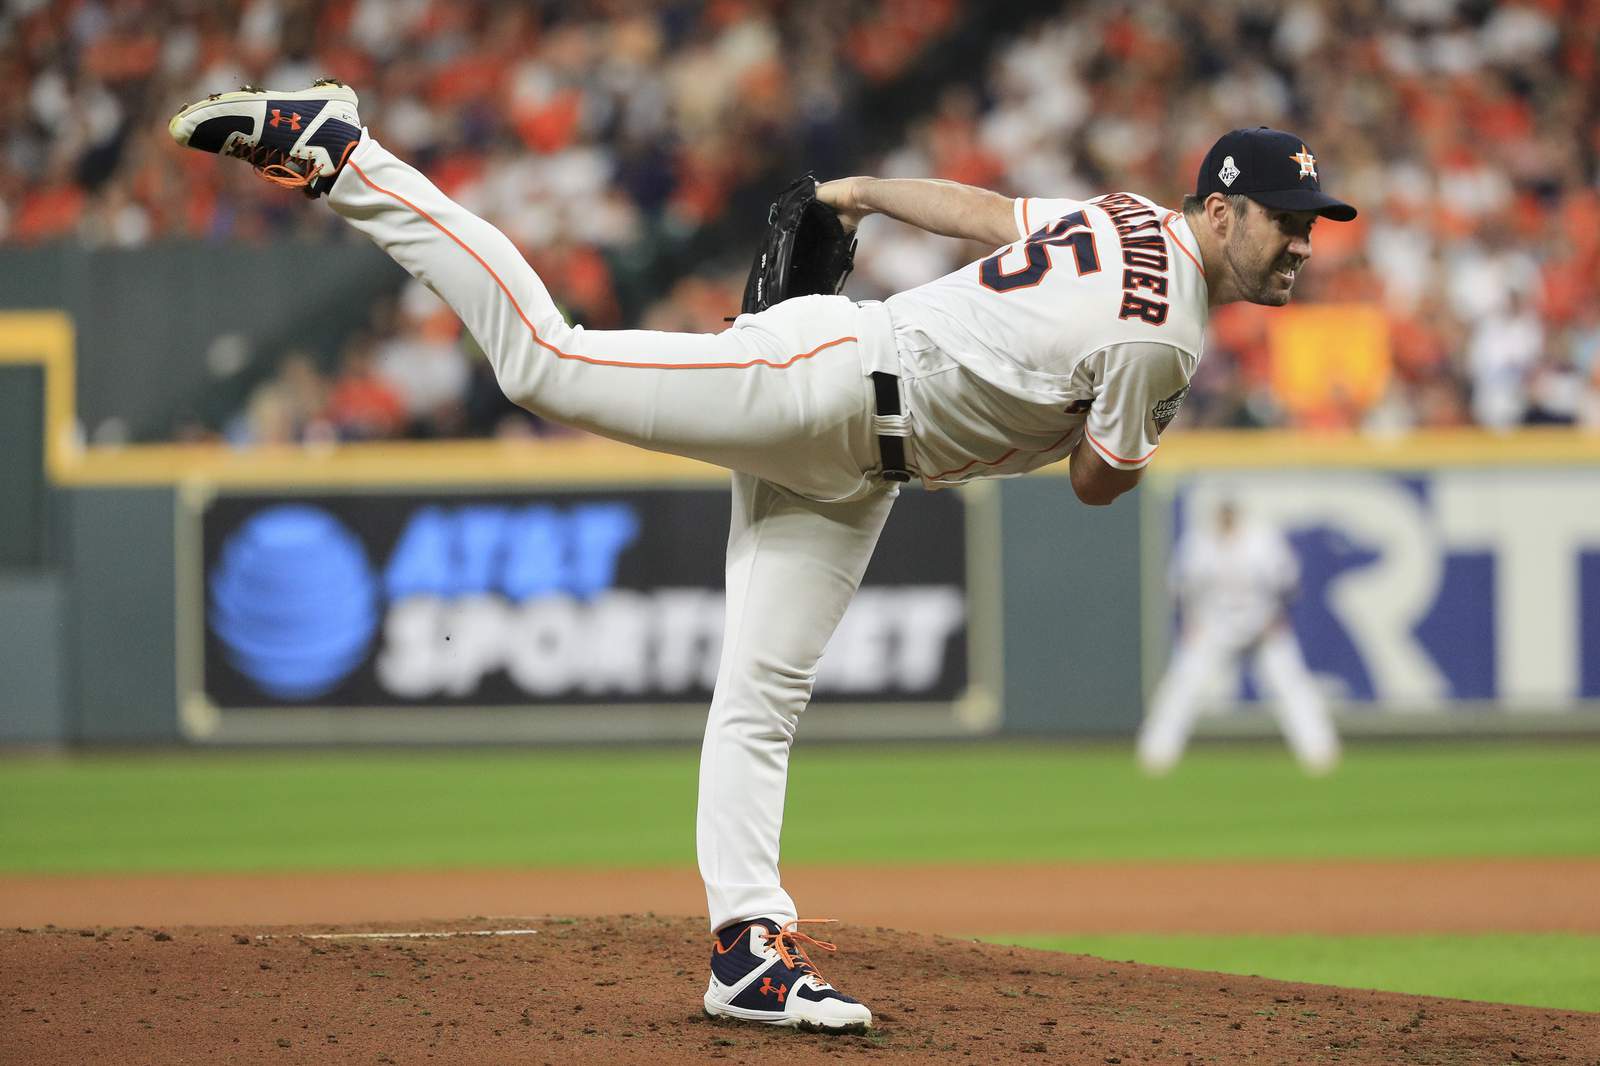 A breakdown of the Houston Astros pitching staff as we head into the 2020 season